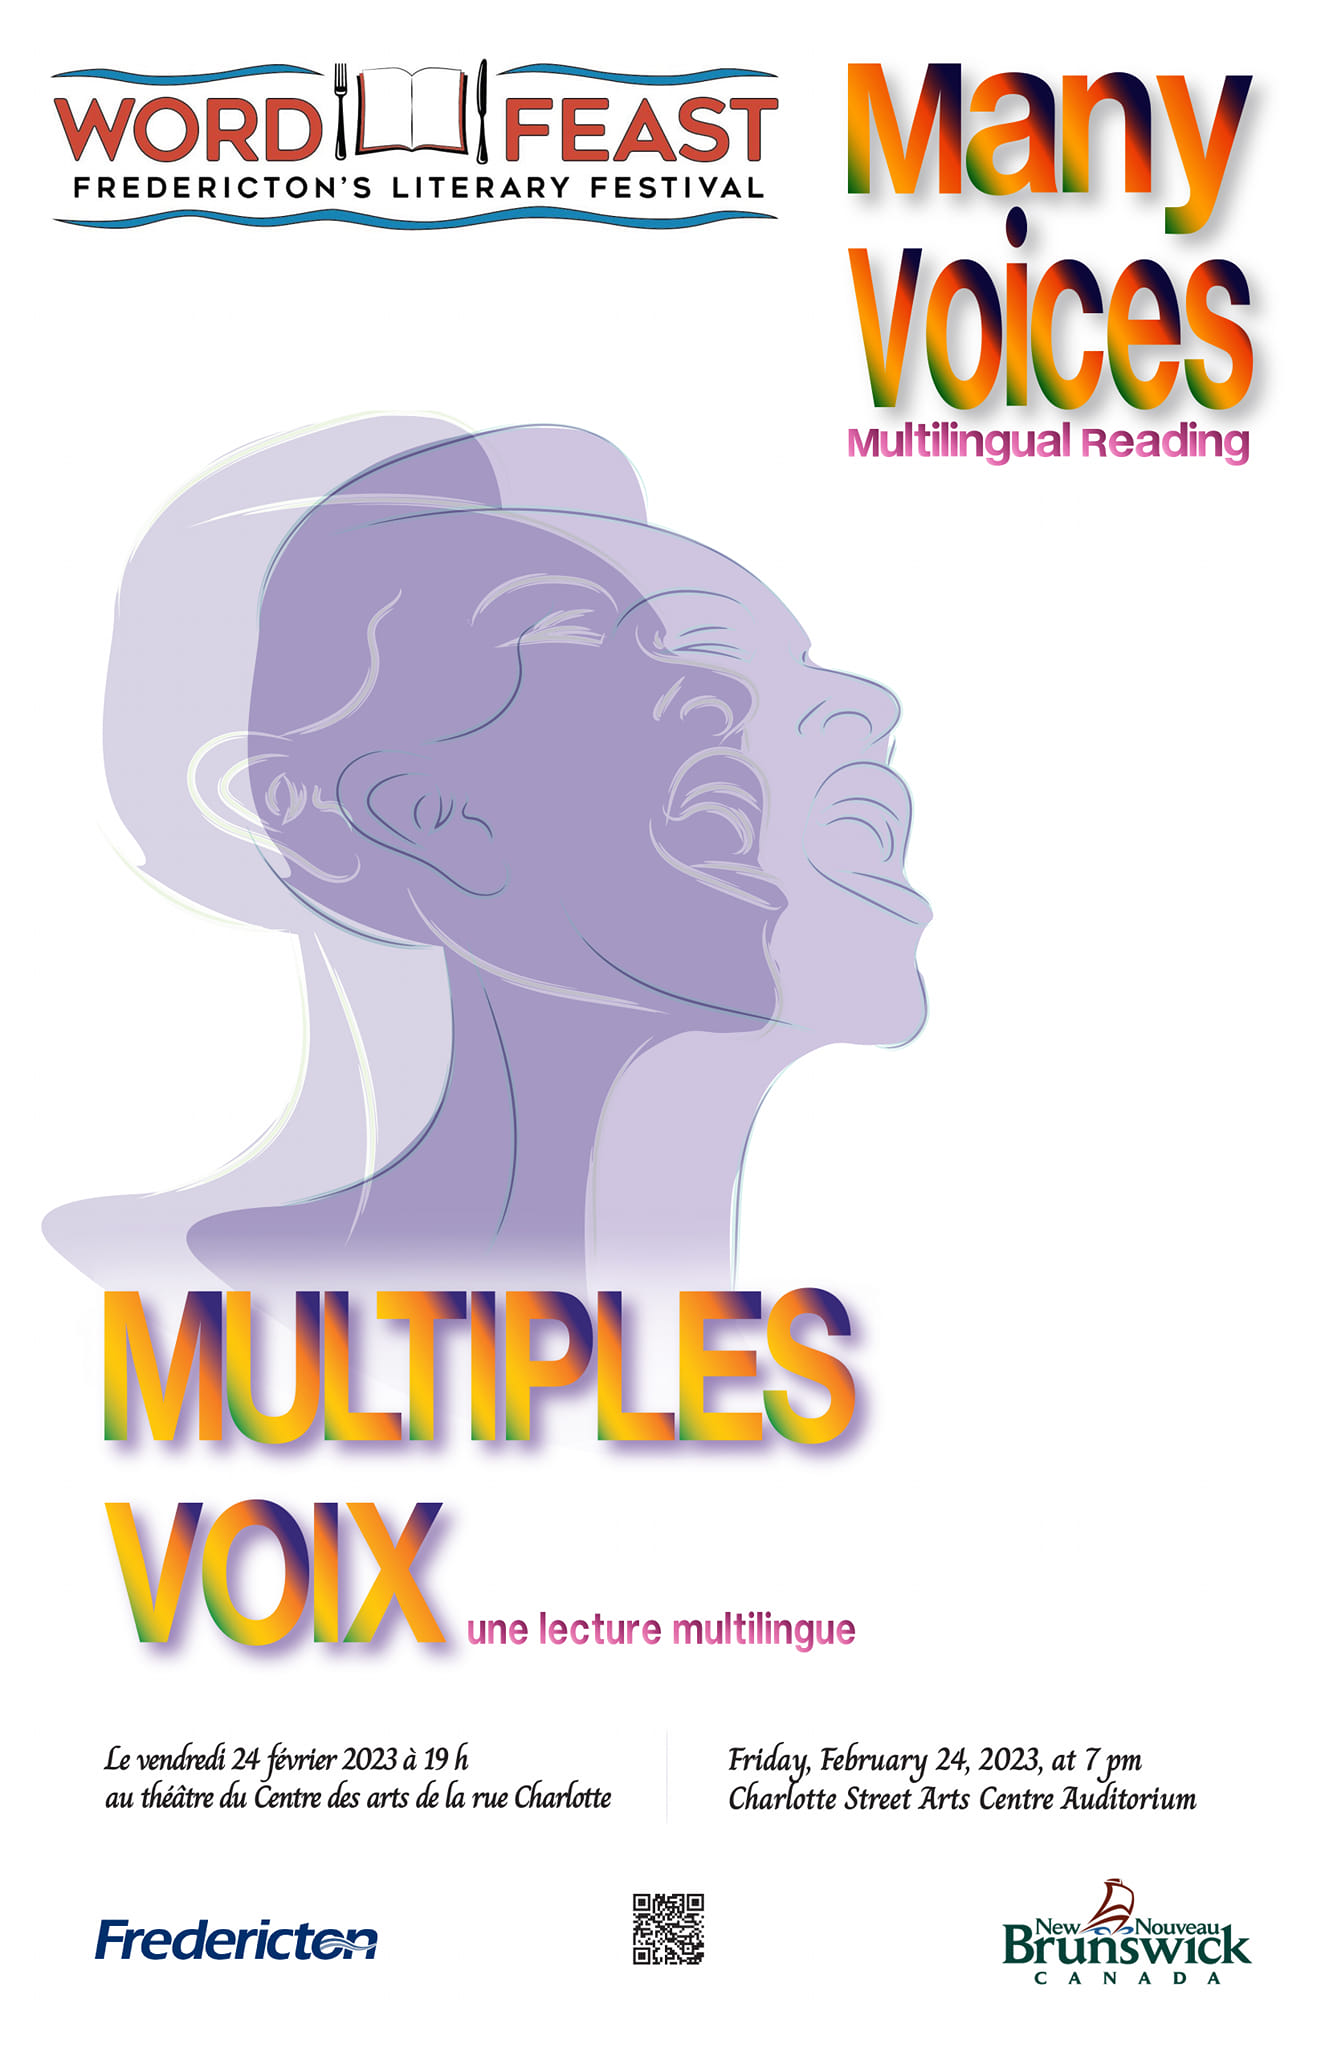 Many Voices Multilingual Reading